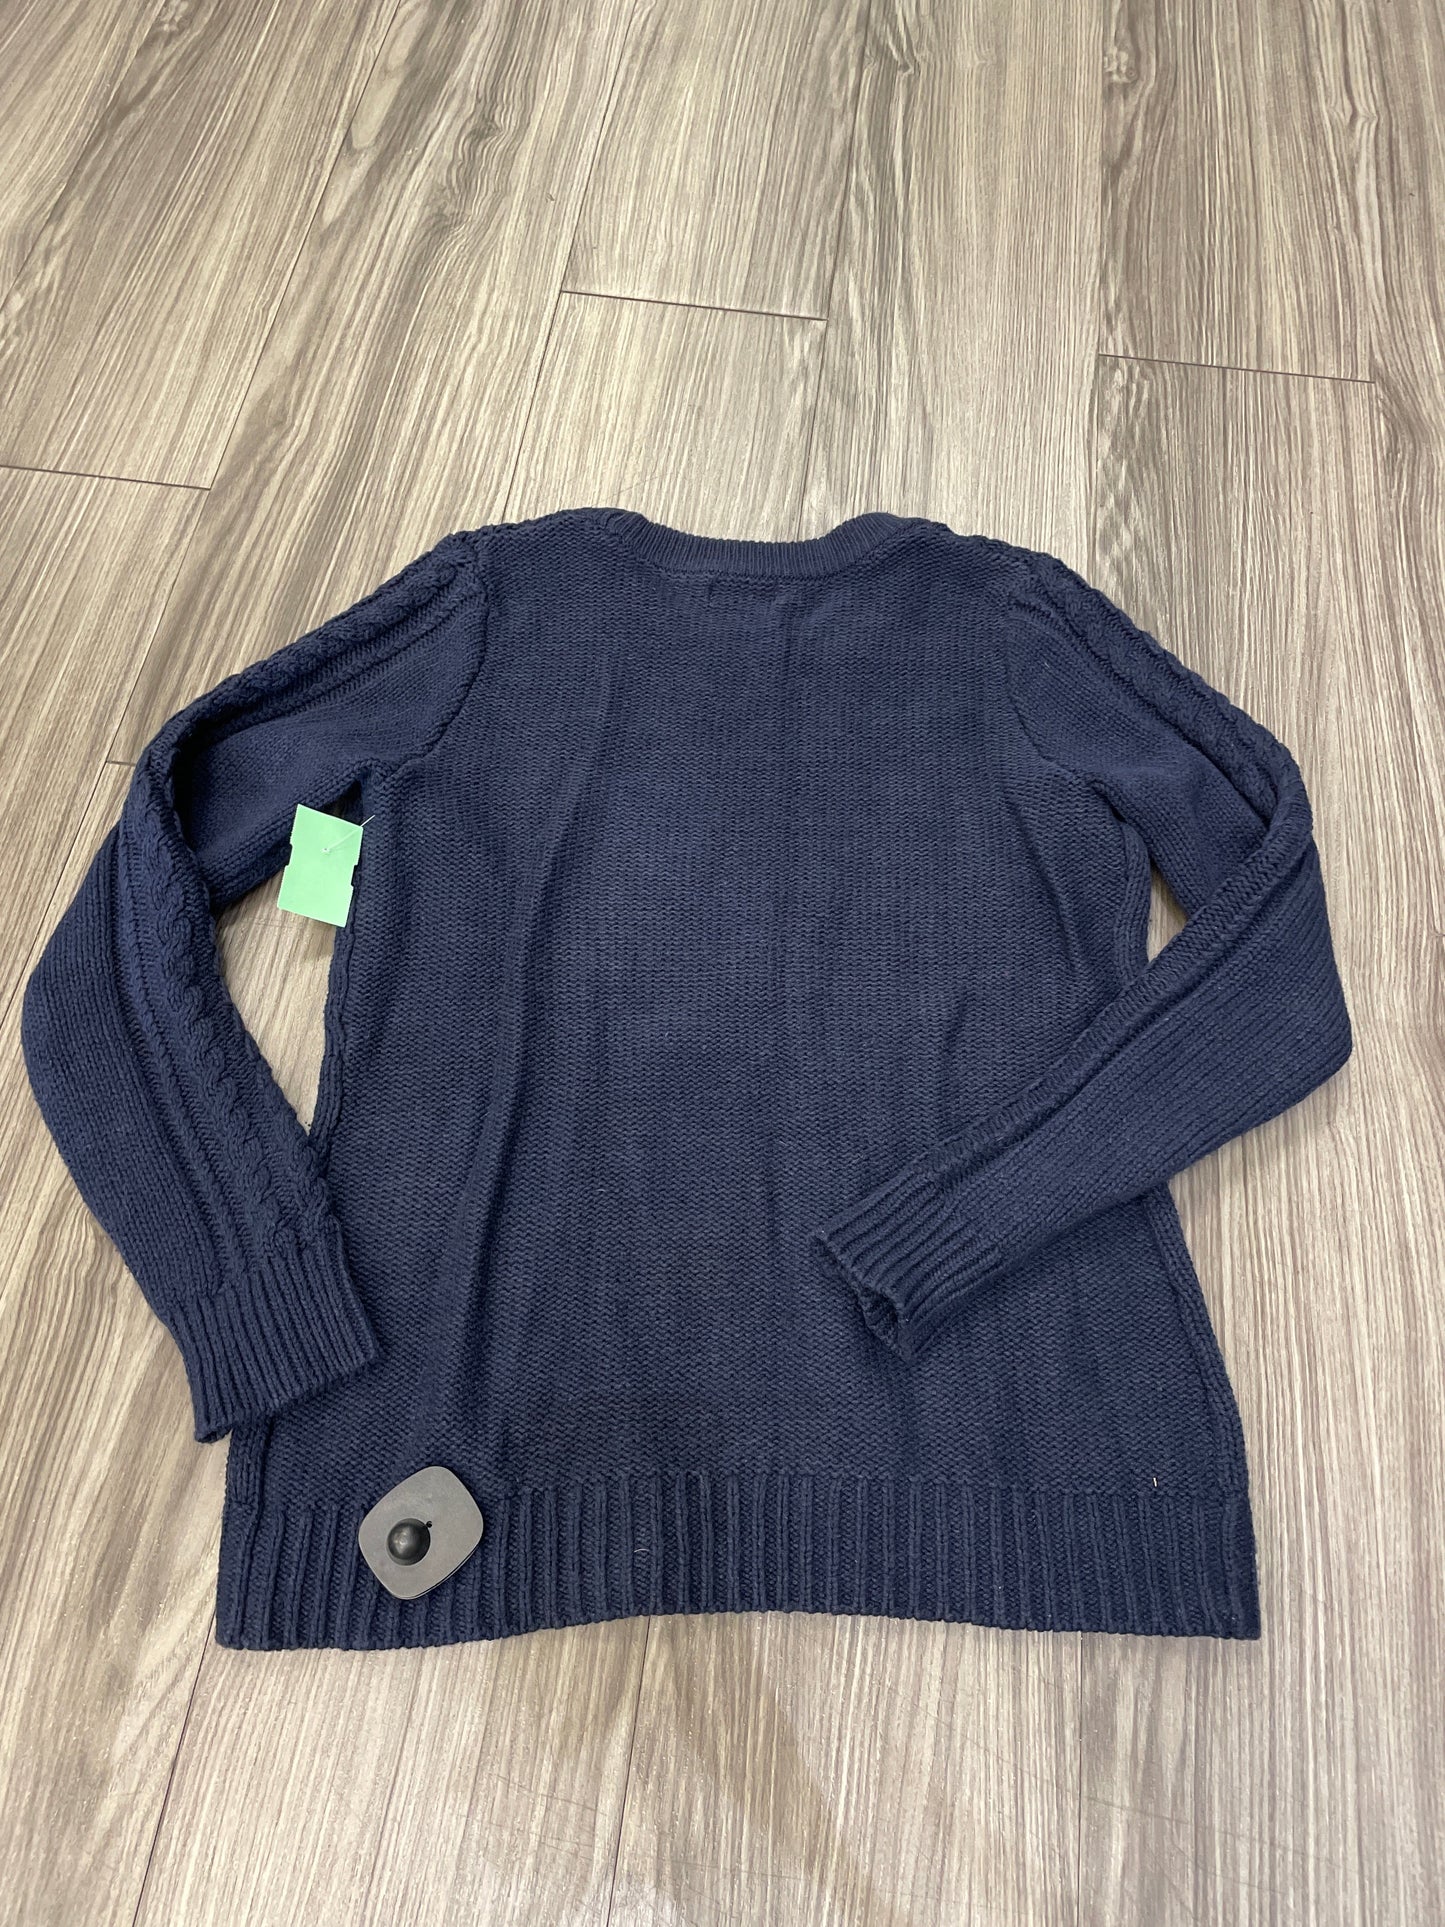 Navy Sweater Old Navy, Size M